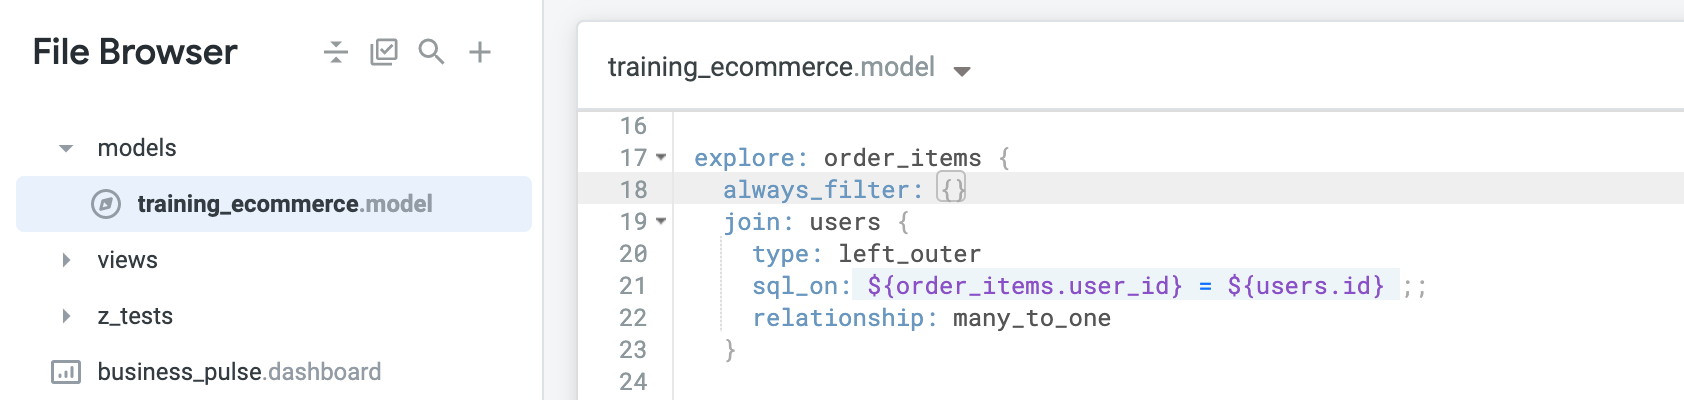 The training_ecommerce.model data, with the addition of the line: 'always_filter: {}'.